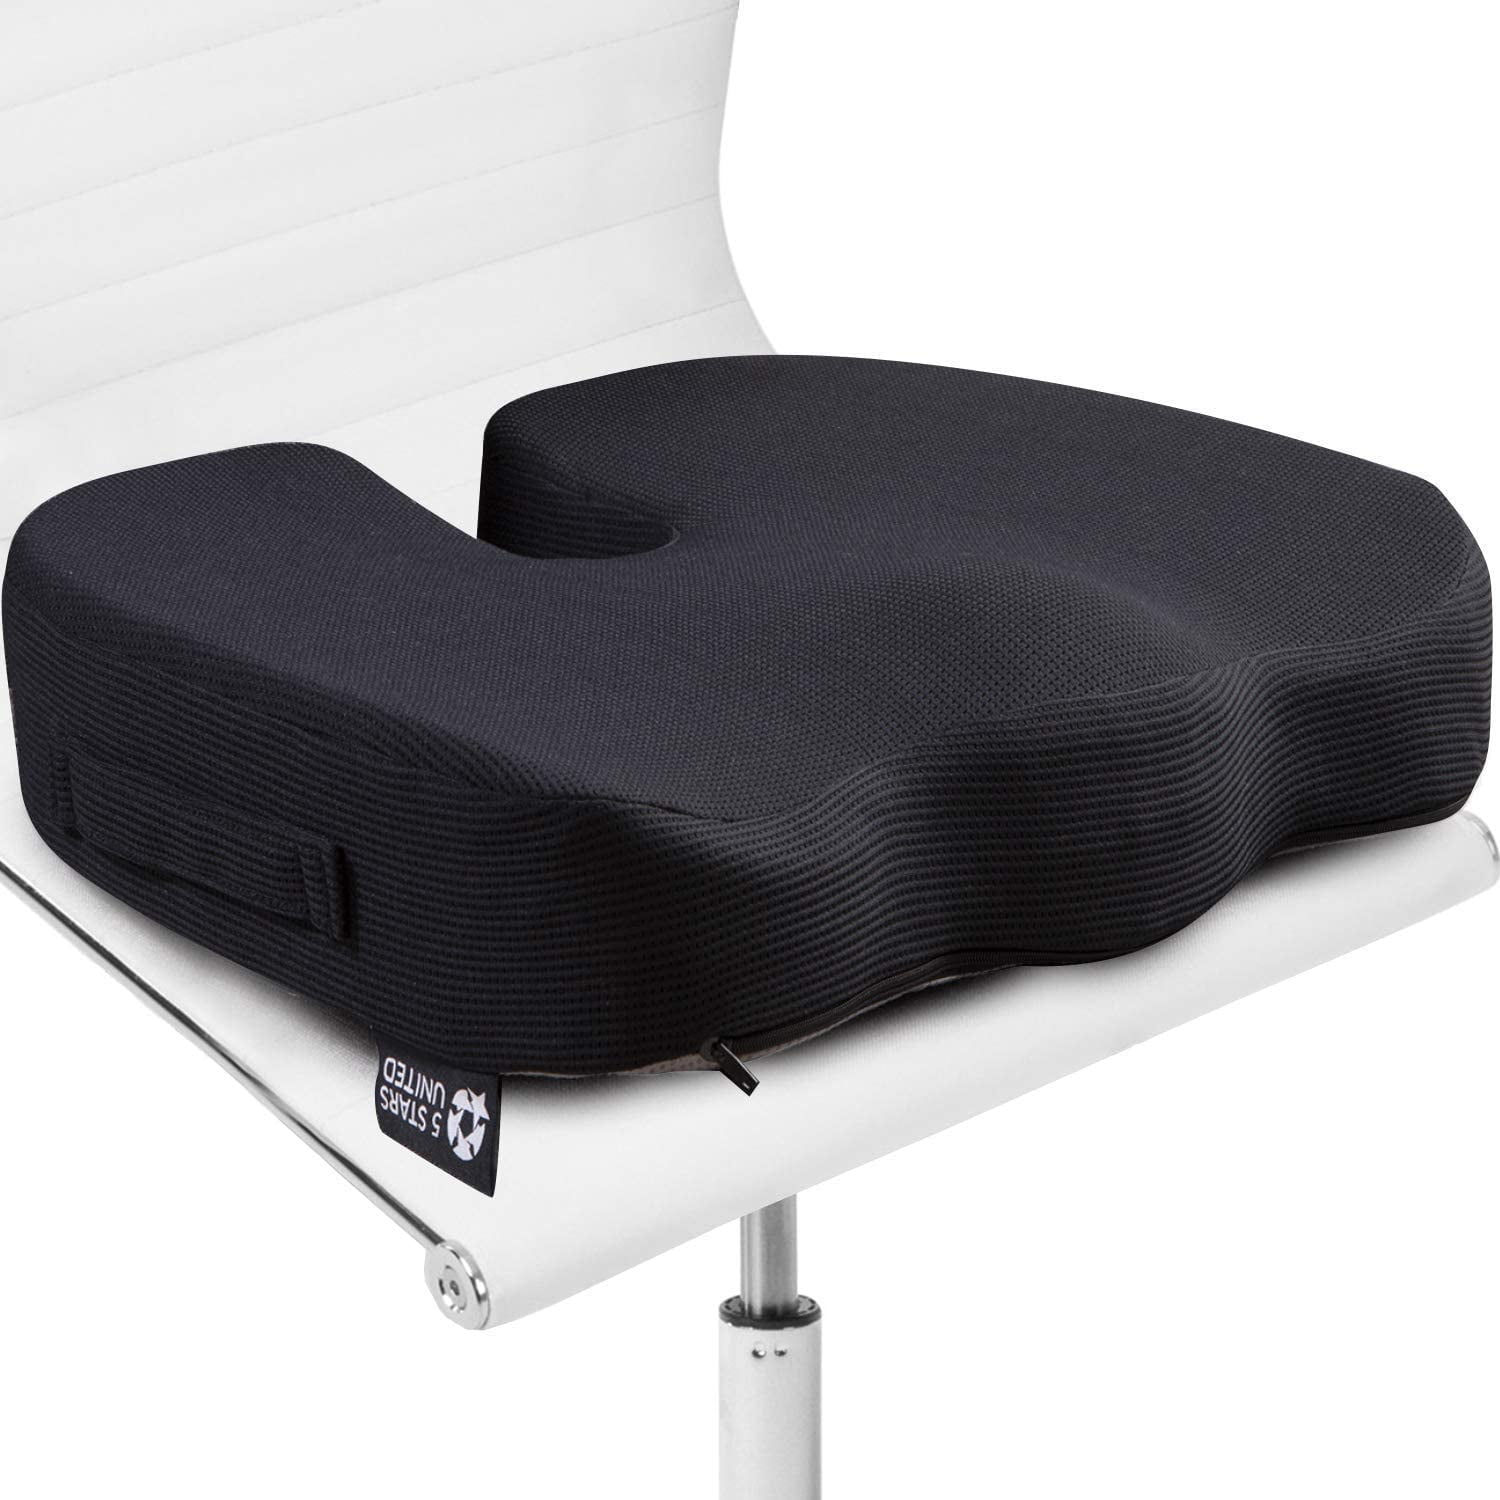 Wheelchair Car Seat Sciatica Adapt Orthopedic Deluxe Memory Foam Seat Cushion for Lower Back Improves Posture Support Cushion for Office Chair Coccyx or Tailbone Pain Relief 